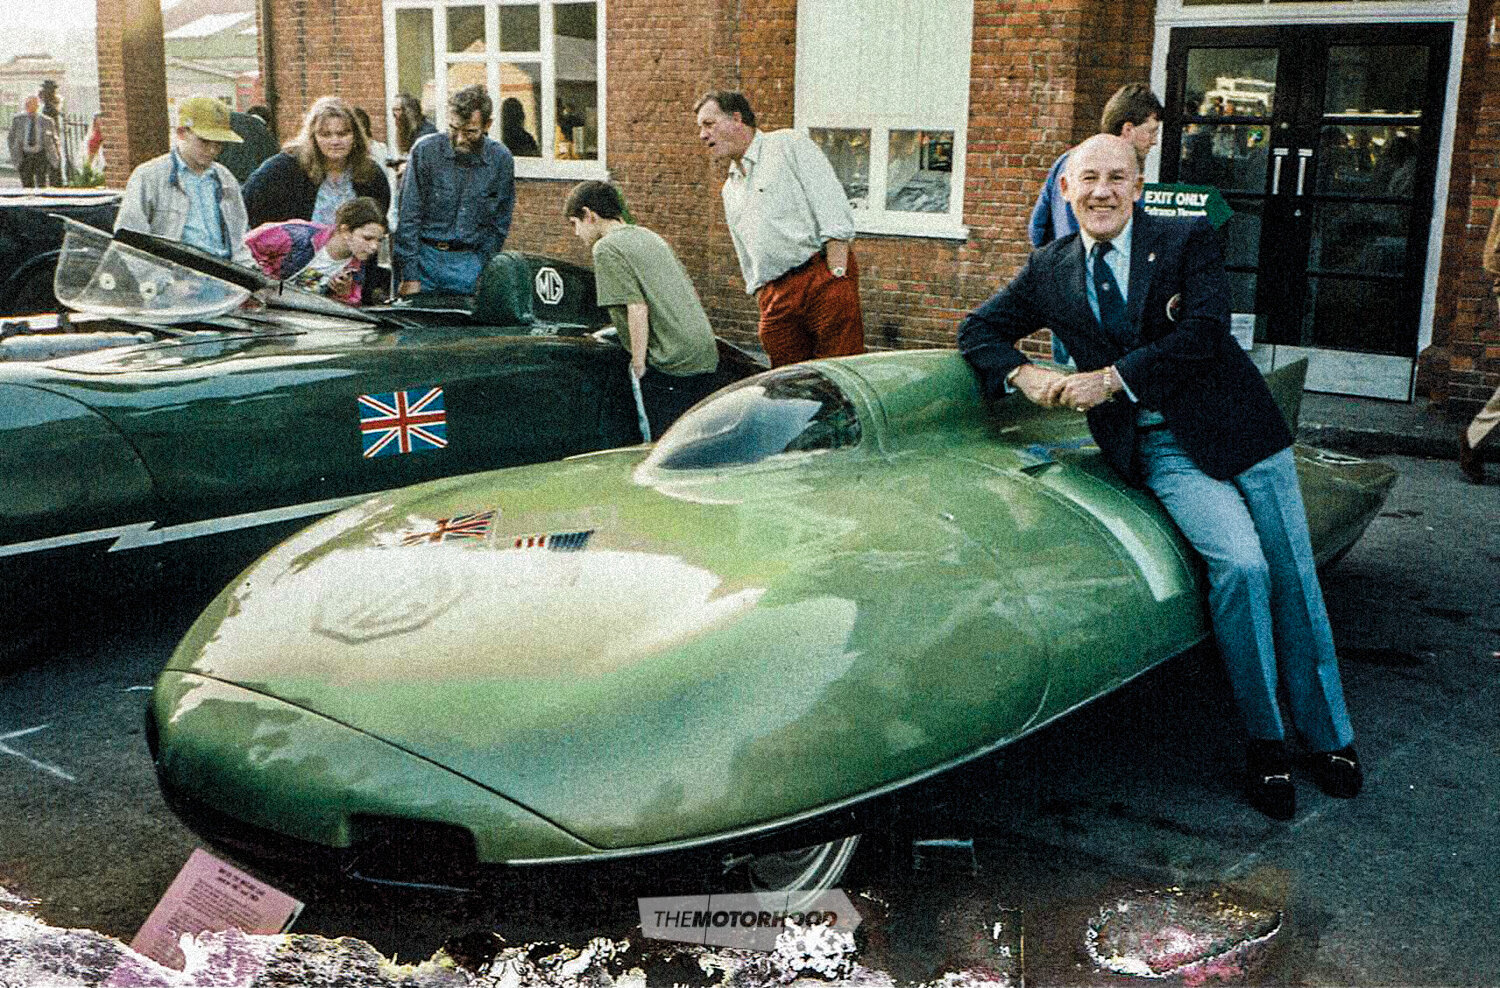 Stirling with the MG EX 181 record-breaking car at the Brooklands Museum in Surrey, England, 1998 — 41 years after he drove it on the Bonneville Salt Flats in the US in what was, he said, a frightening experience